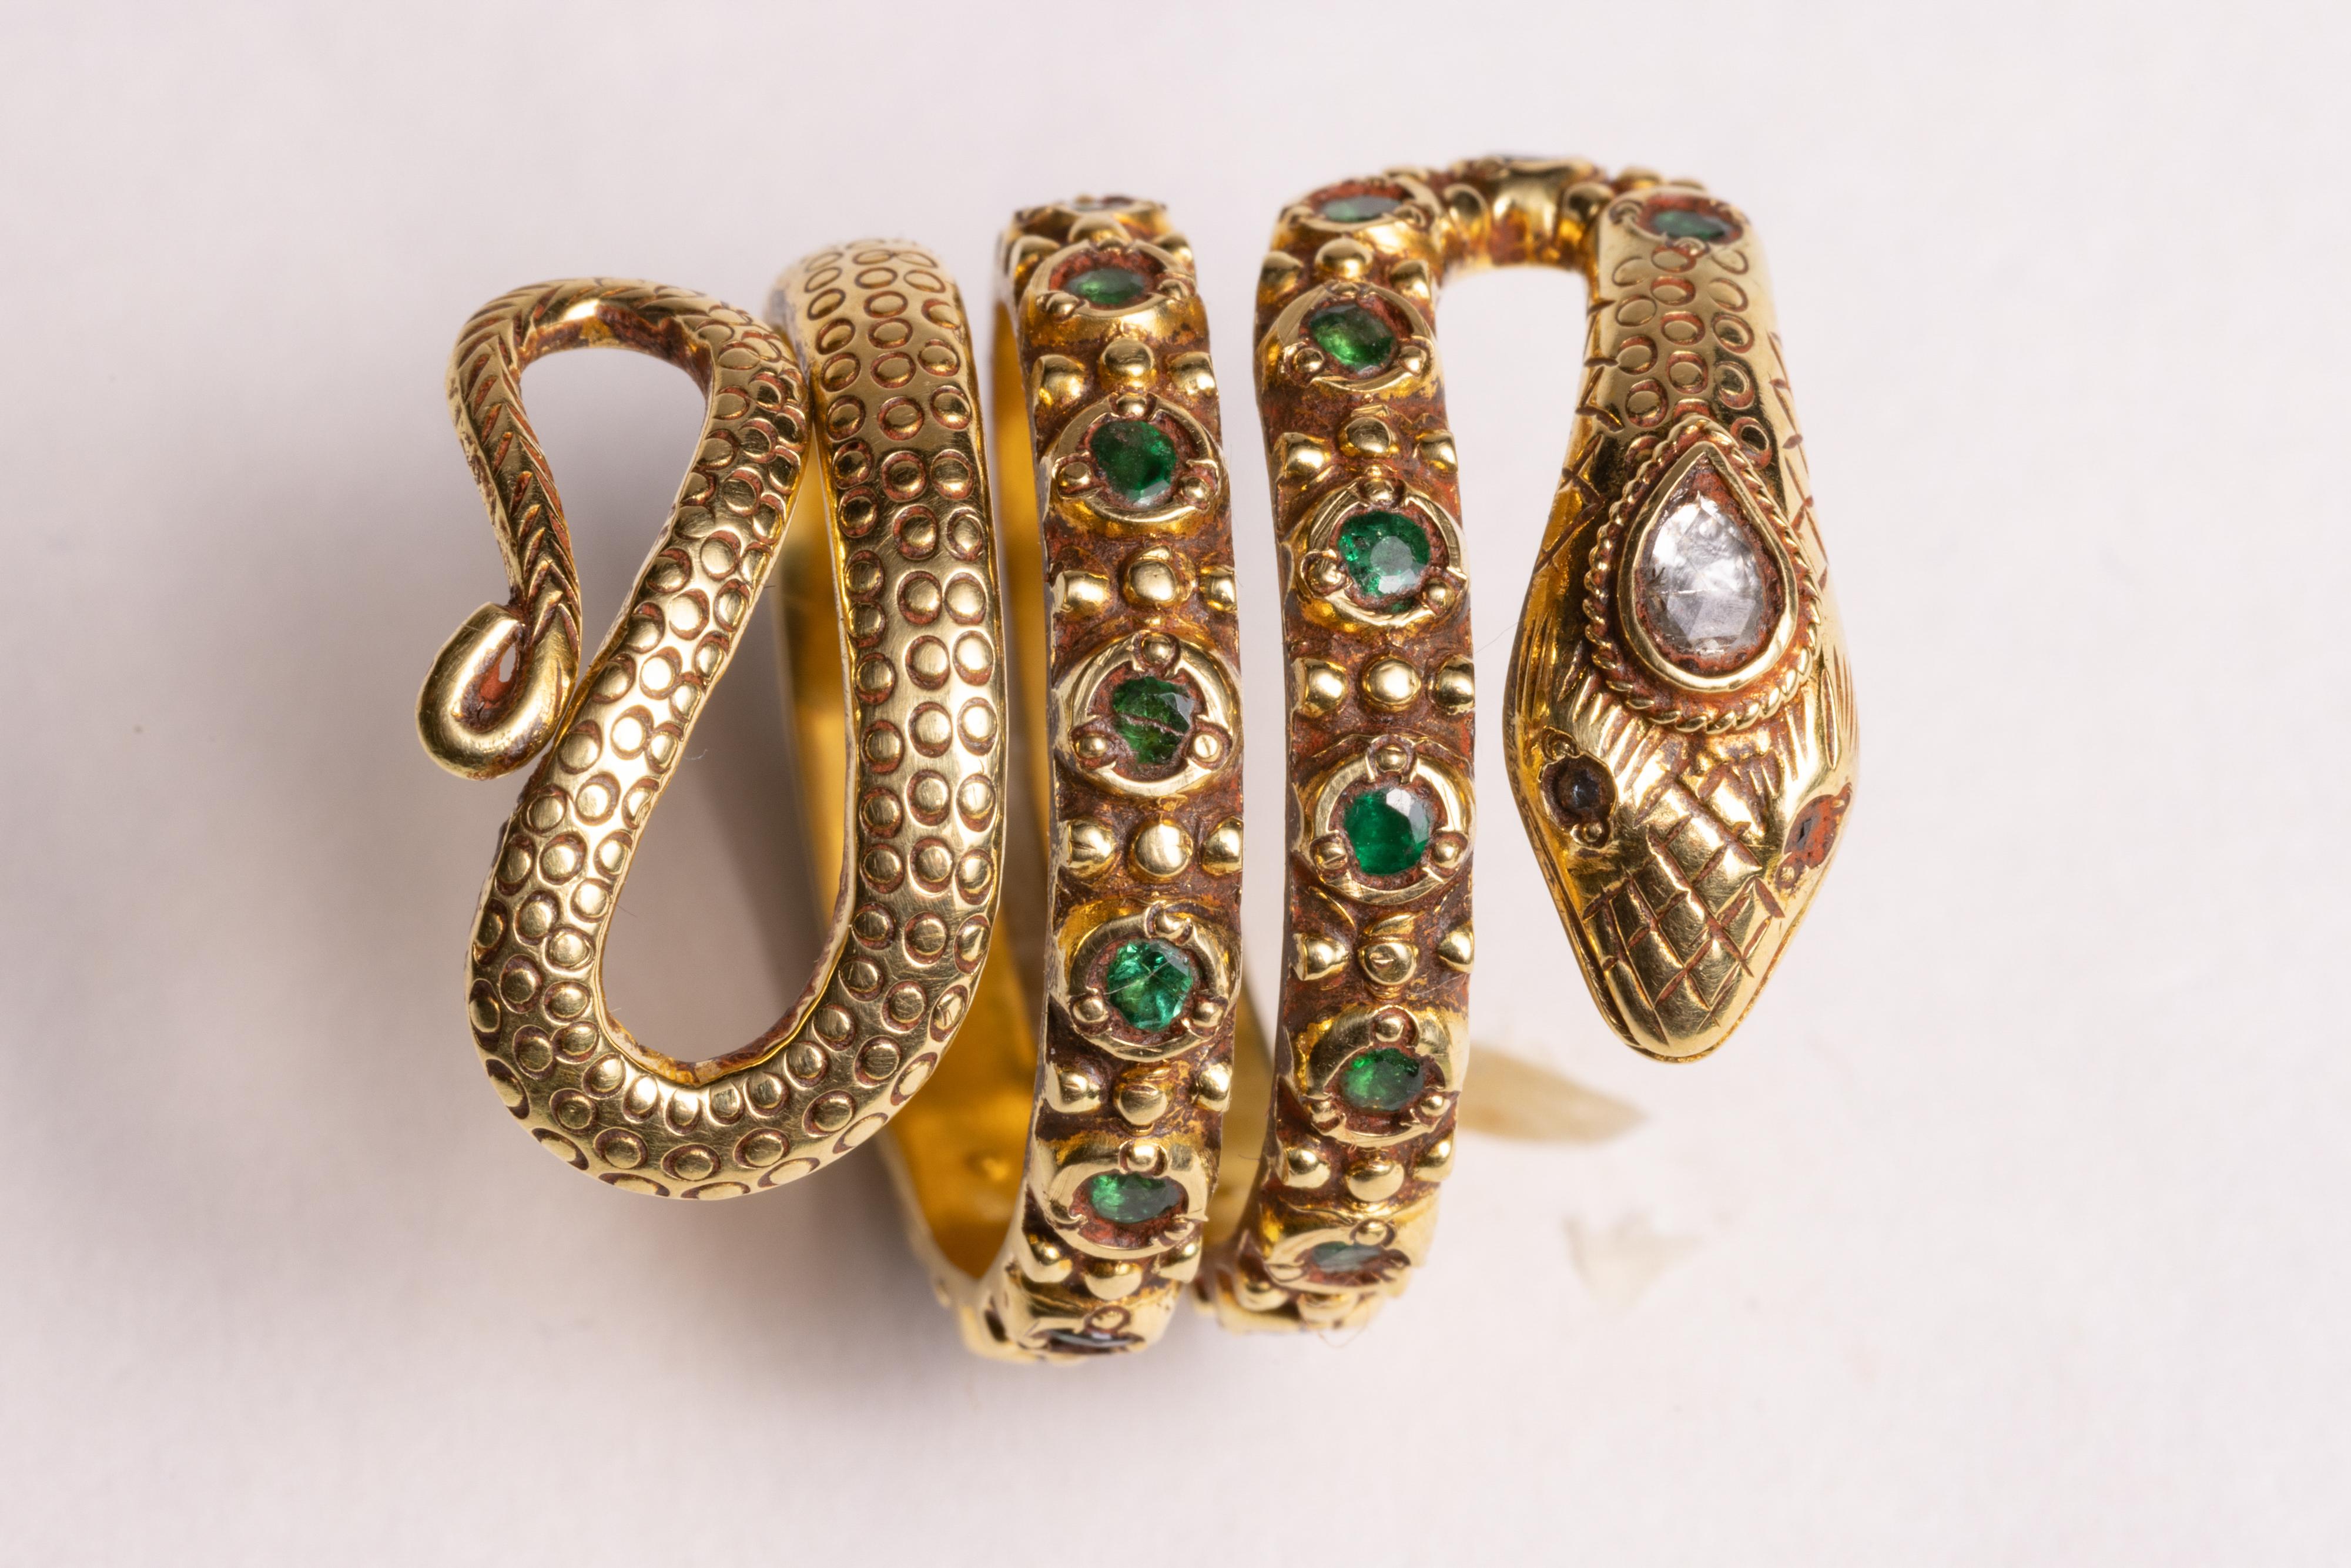 An amazing 18K gold coiled snake ring with rounded, faceted emeralds around the band and hand-tooled gold workmanship eliciting the scales of the snake.  The third eye is a faceted, pear-shaped diamond and has small round faceted rubies for the